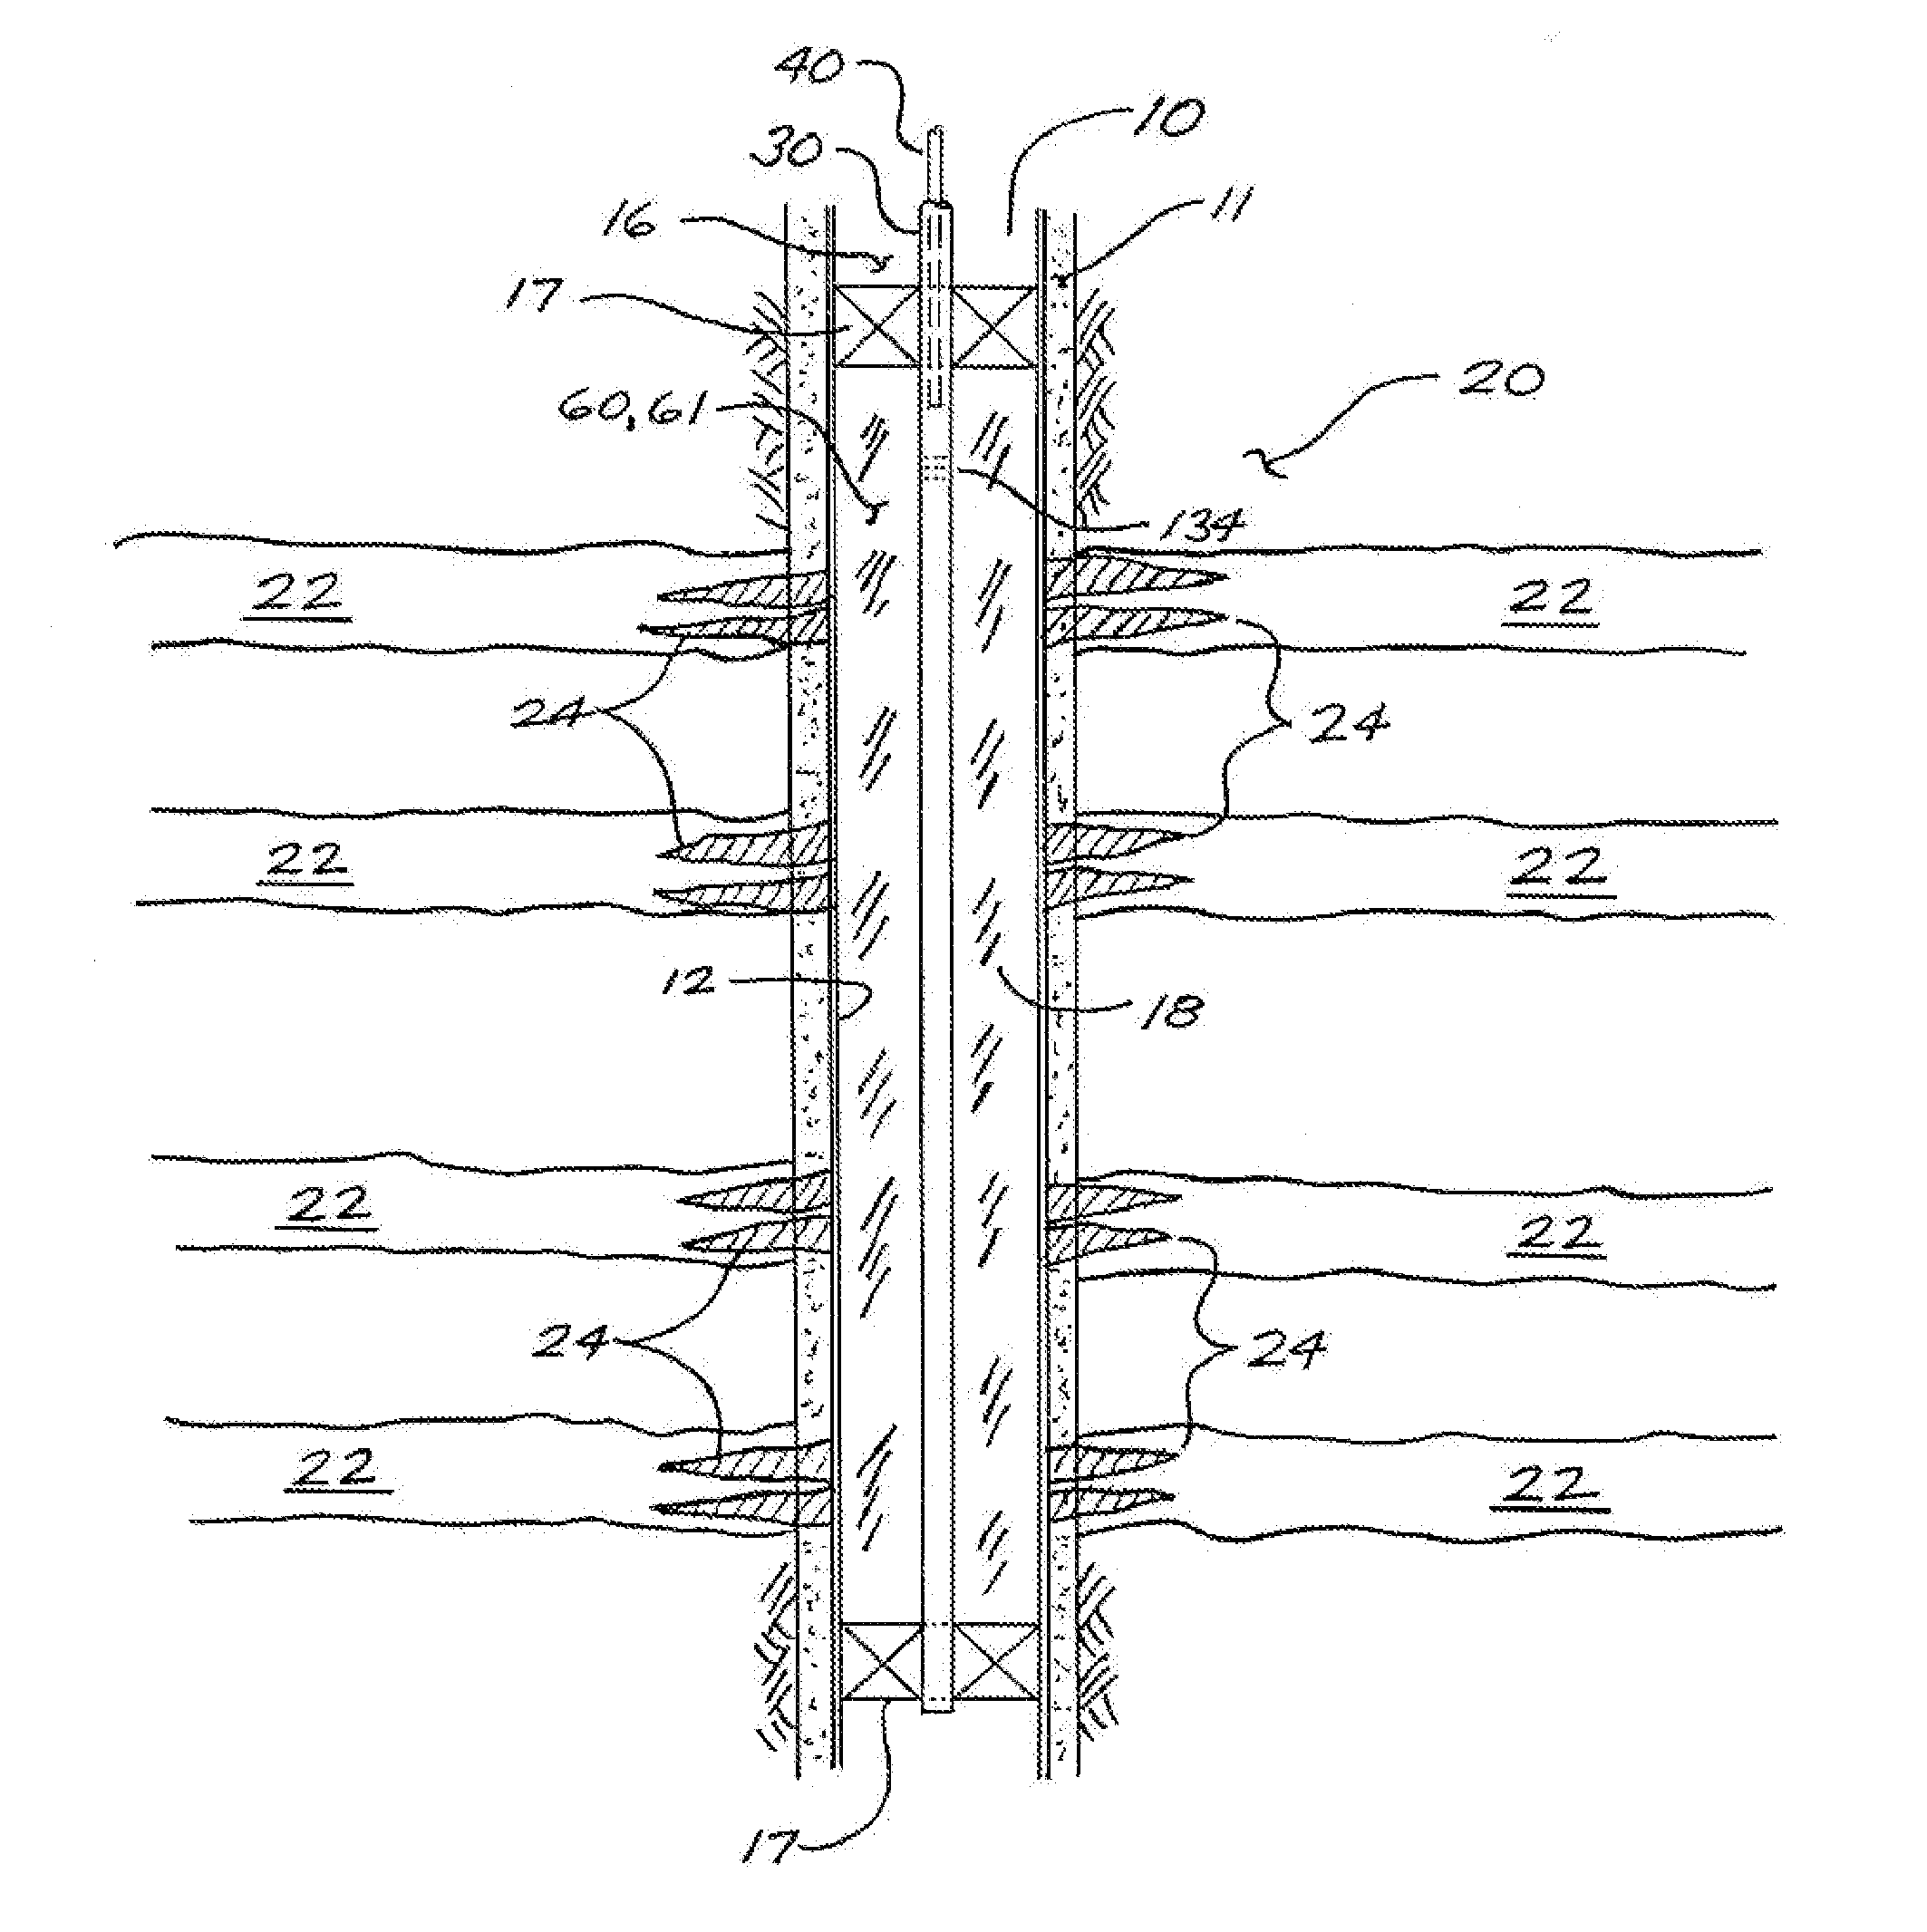 Method and apparatus for freeze-thaw well stimulation using orificed refrigeration tubing